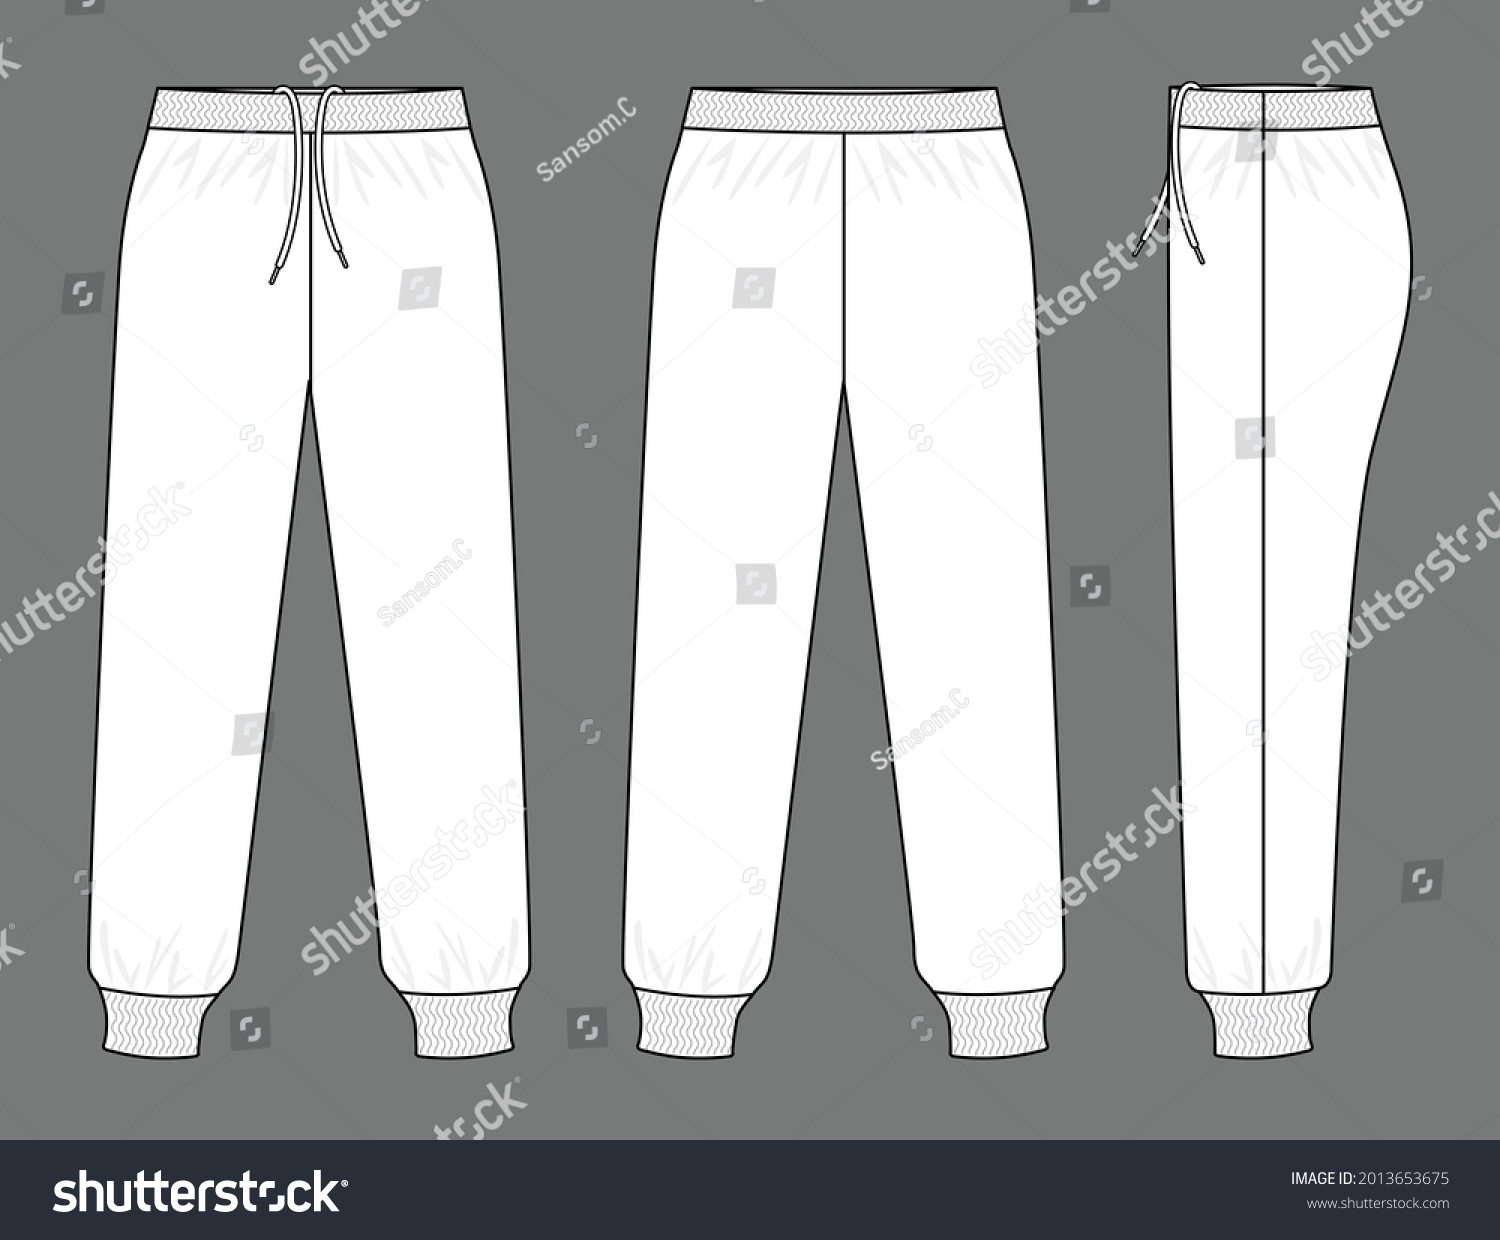 SVG of White Tracksuit Pants Template Vector On Gray Background.Front, Back and Side View. svg